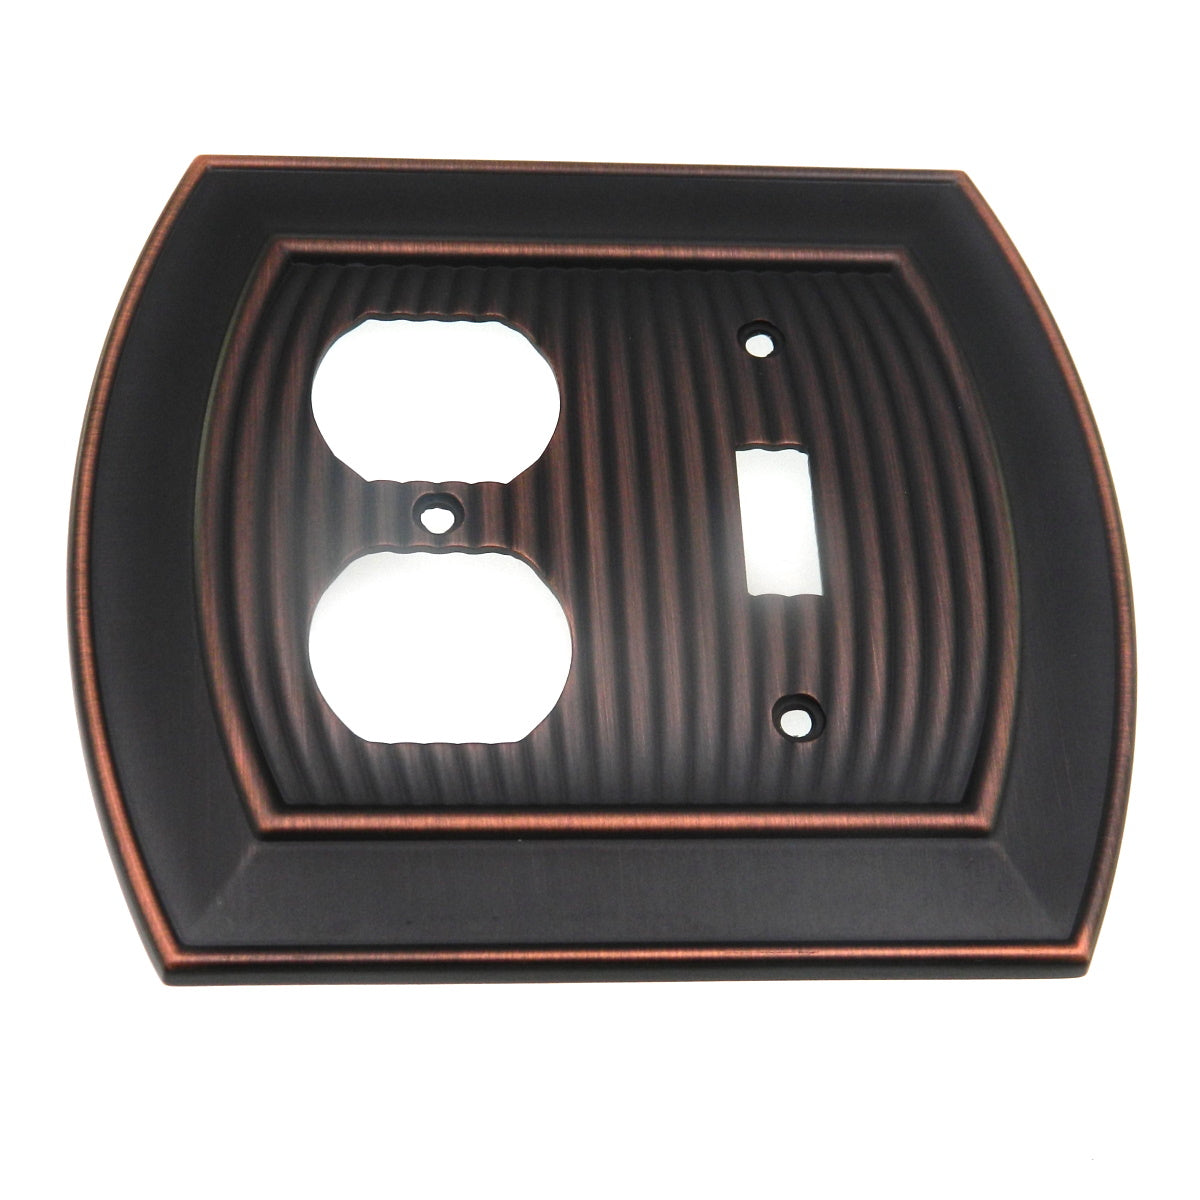 Amerock Sea Grass Oil-Rubbed Bronze 1 Toggle 2 Plug Outlet Wall Plate BP36538ORB